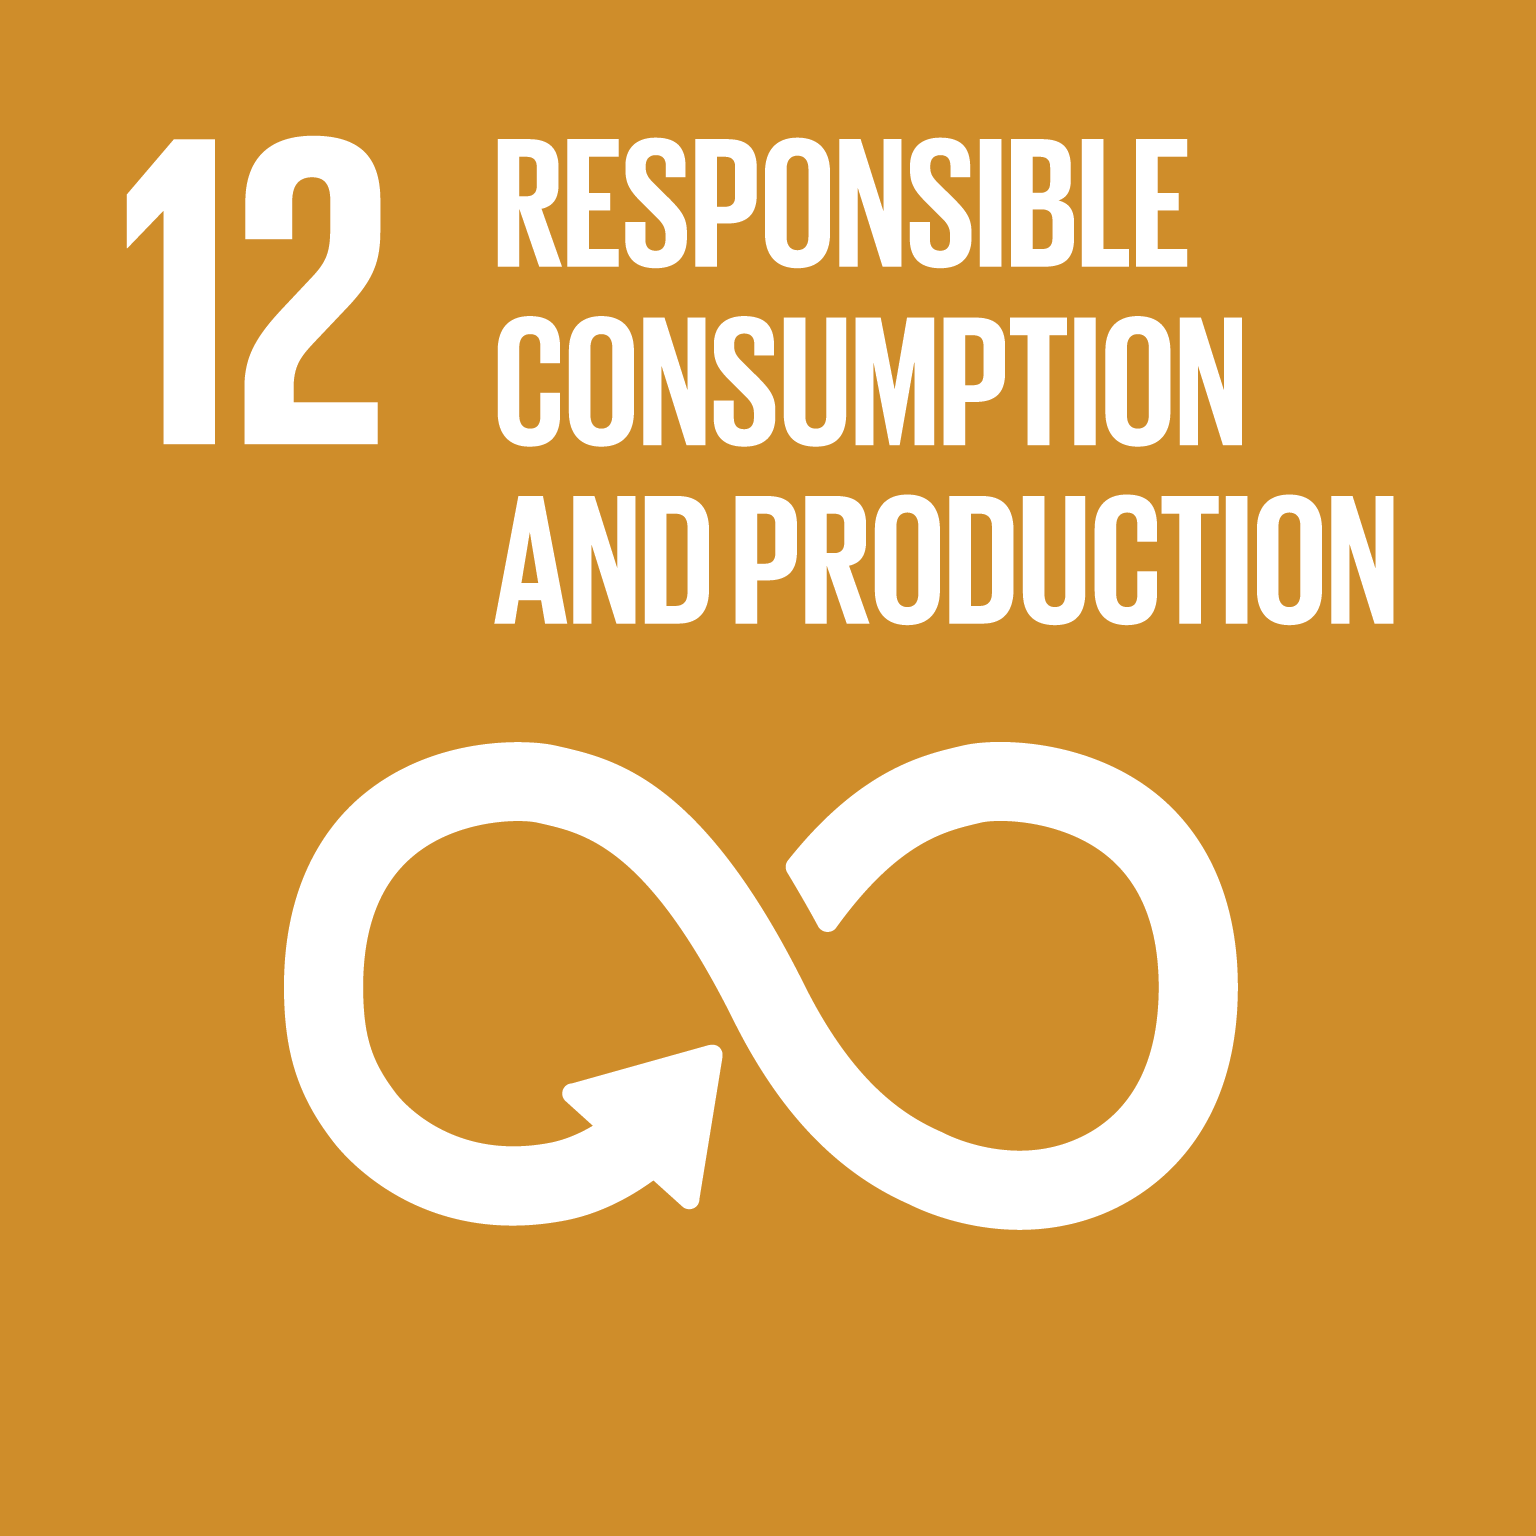 Goal 12. Responsible consumption and production